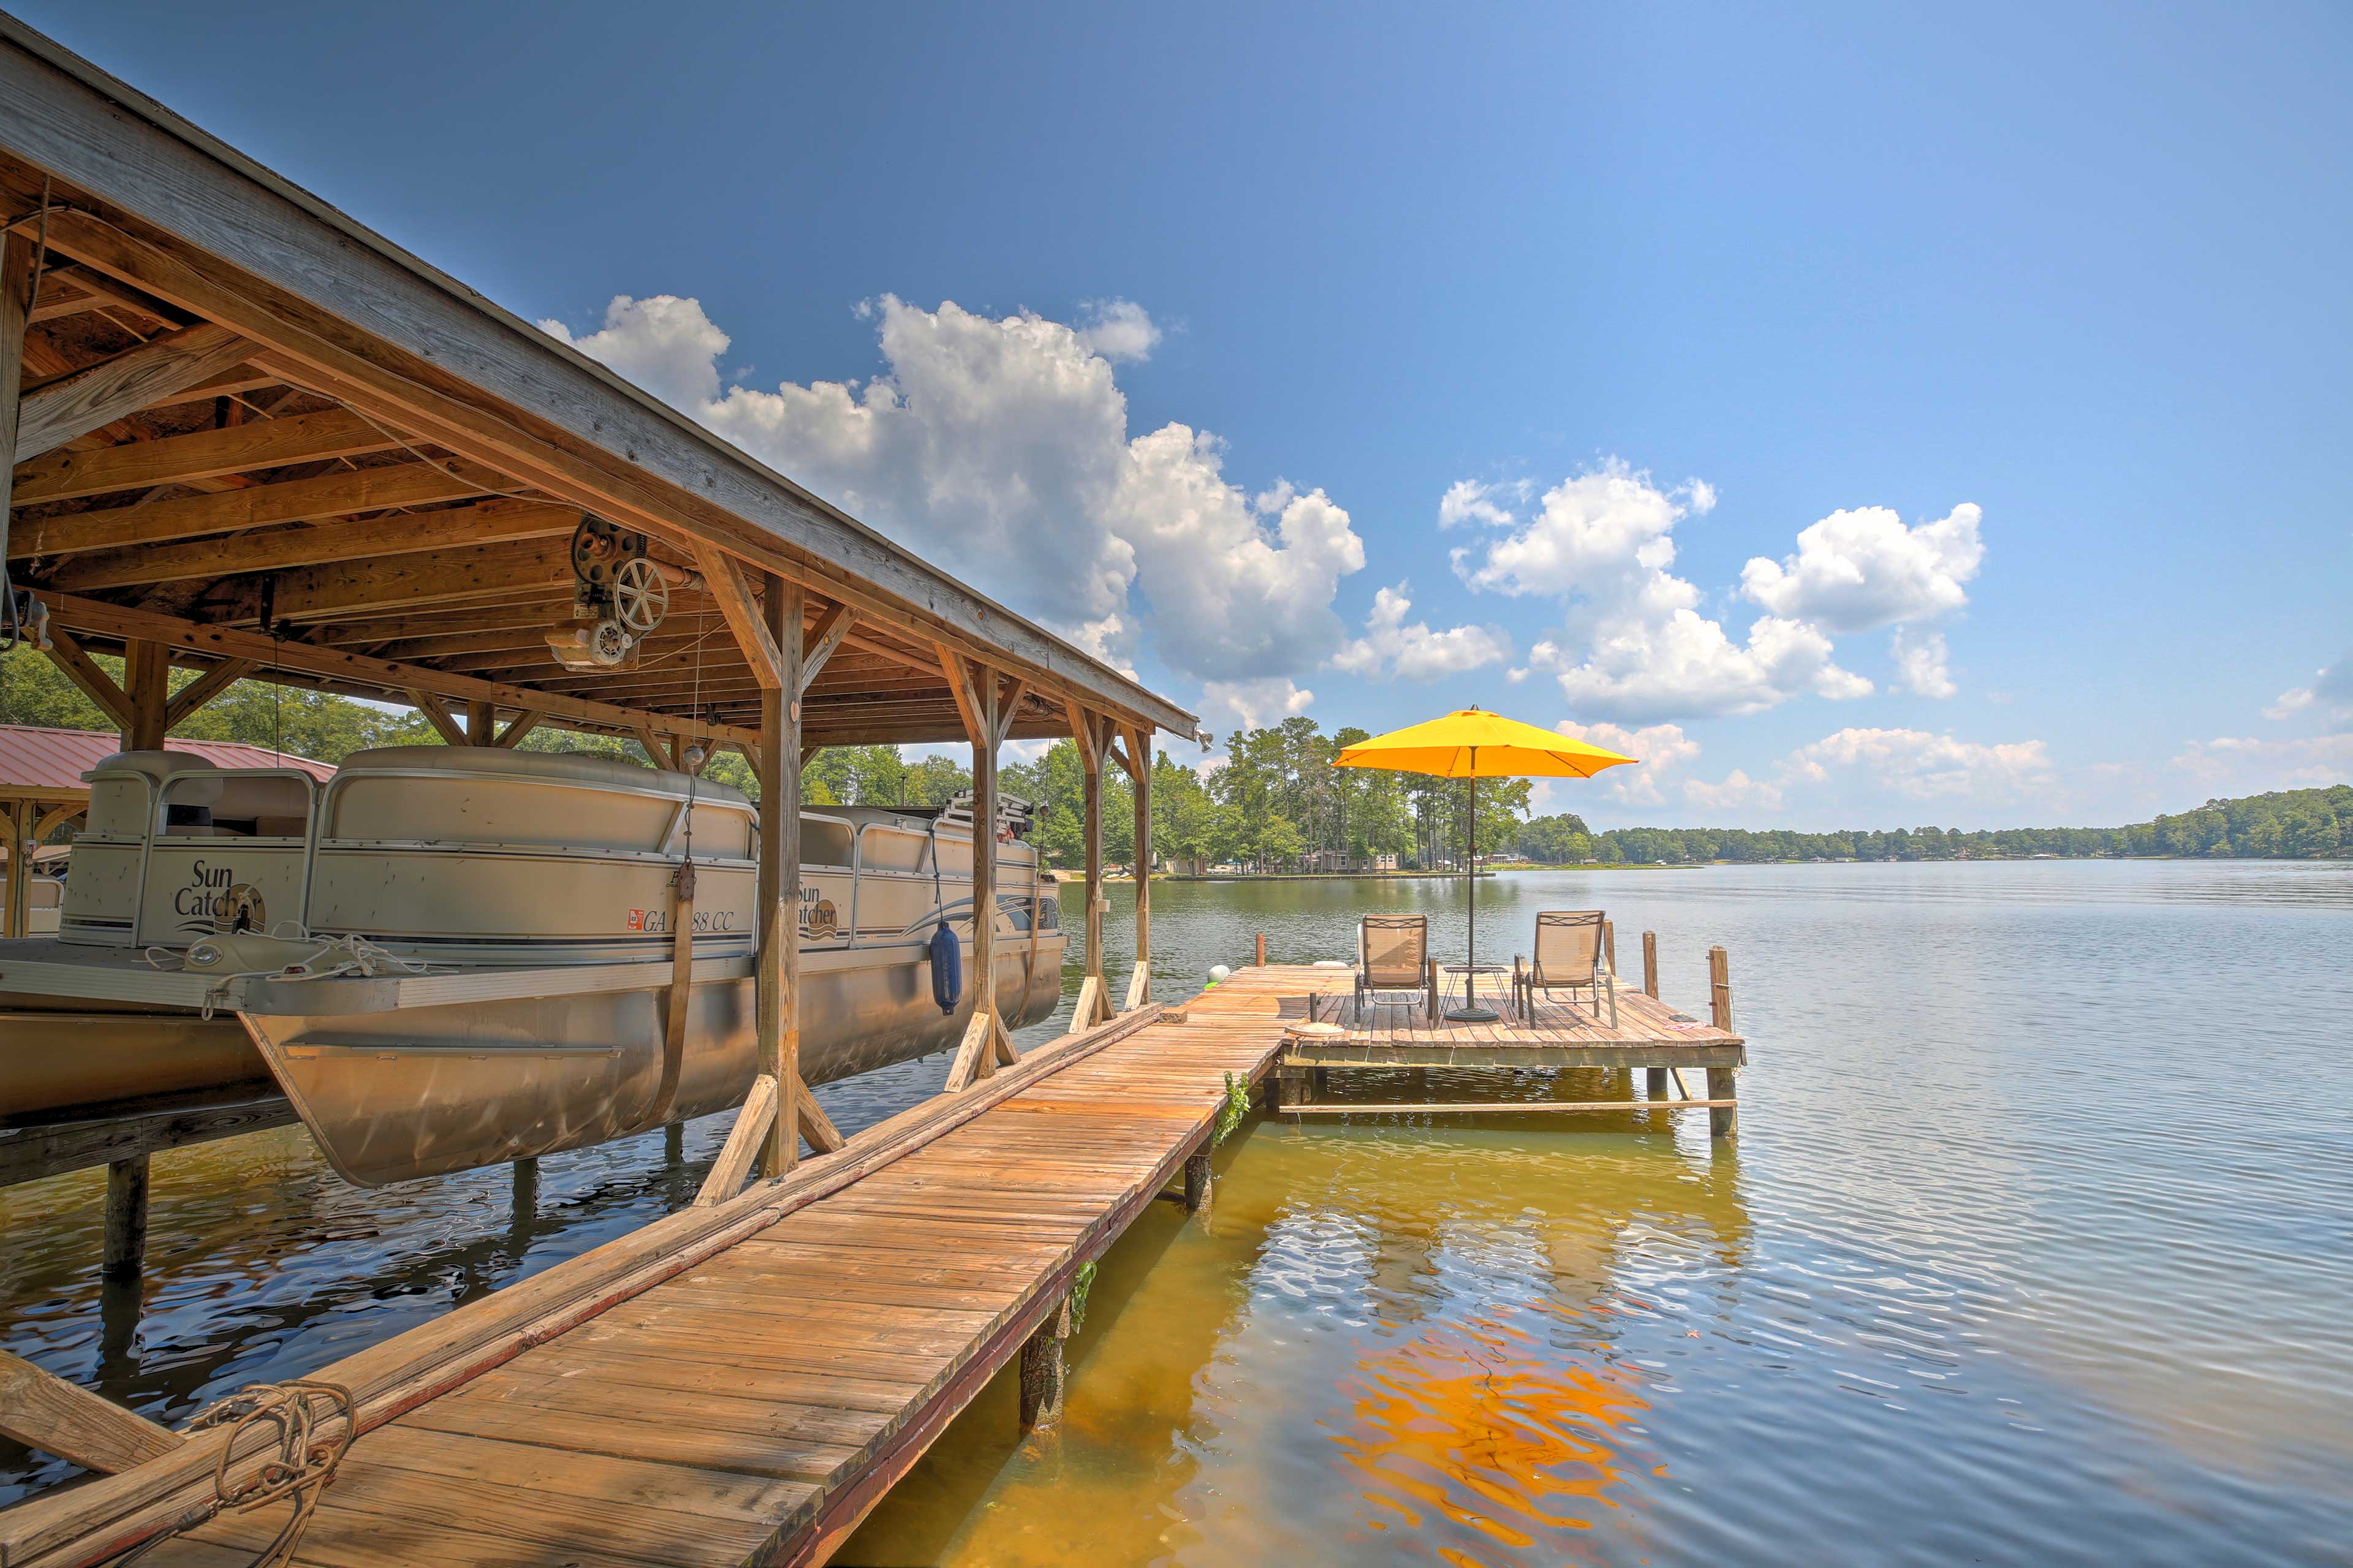 Bring the boat along to dock right on-site!